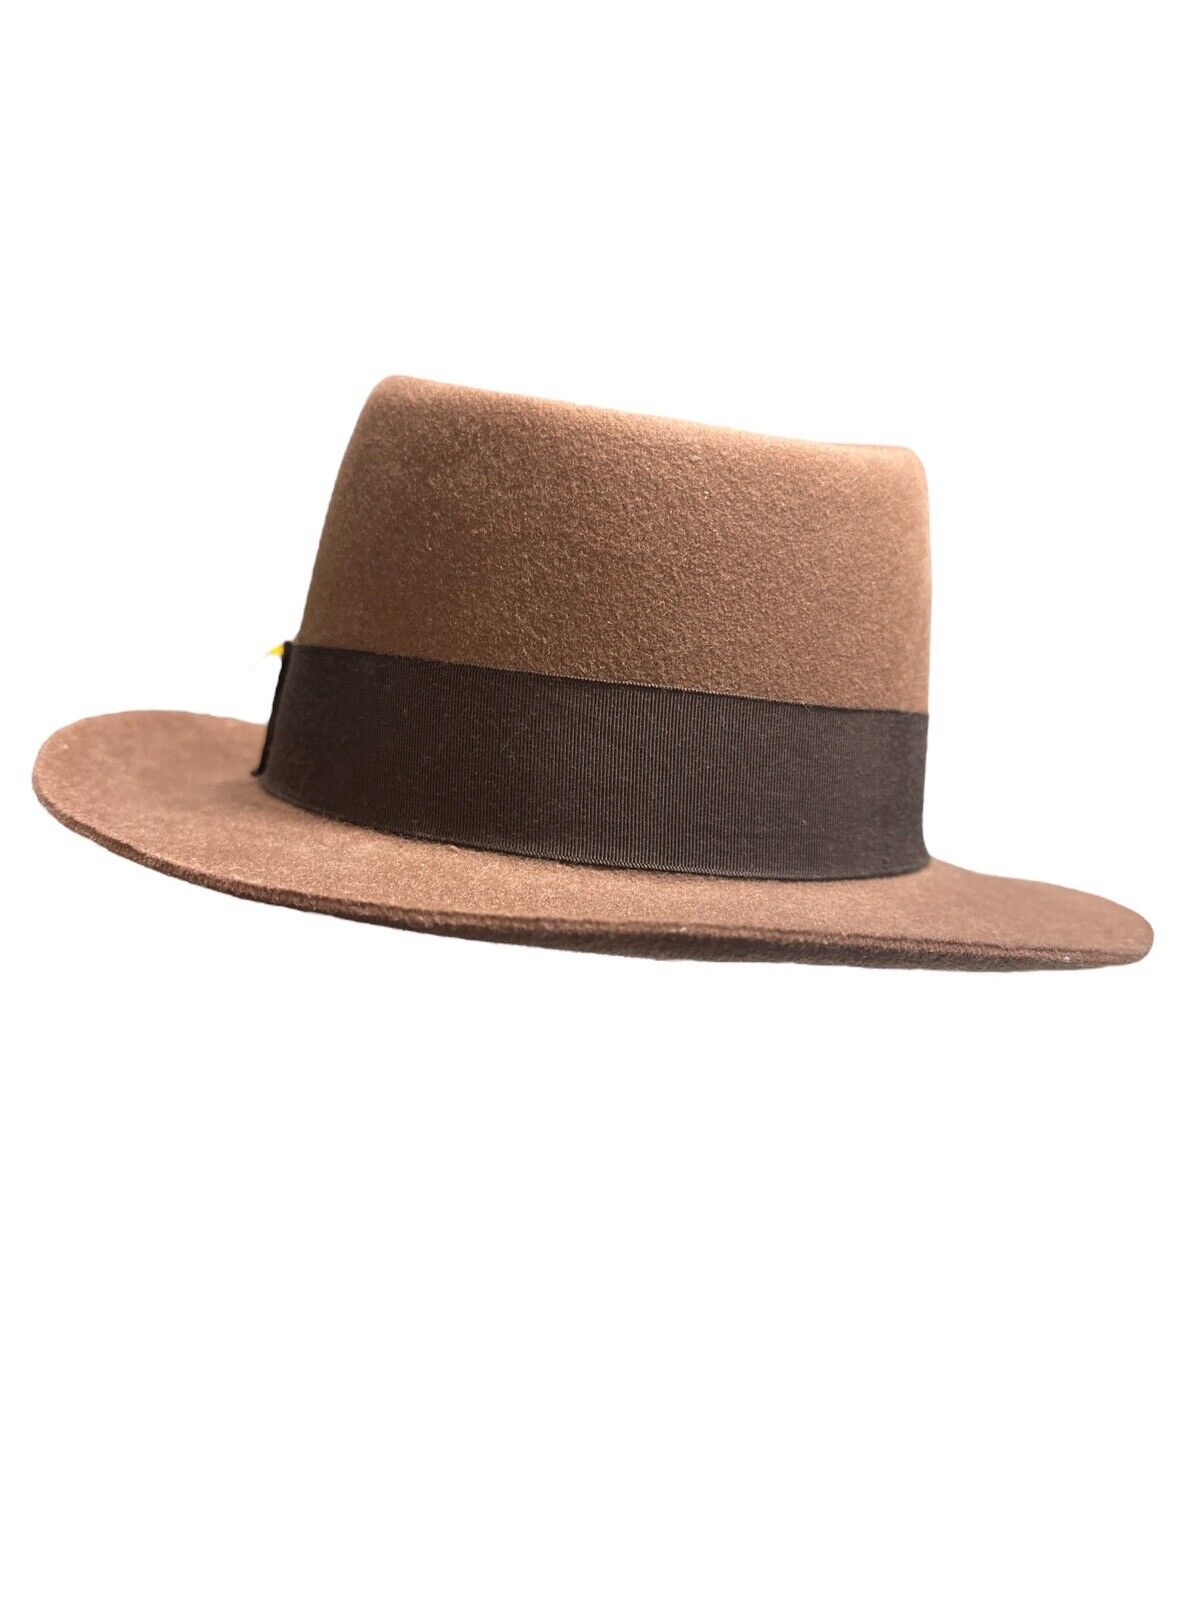 Bollman Lost Ark Mens Hat From Designer Collectio… - image 2